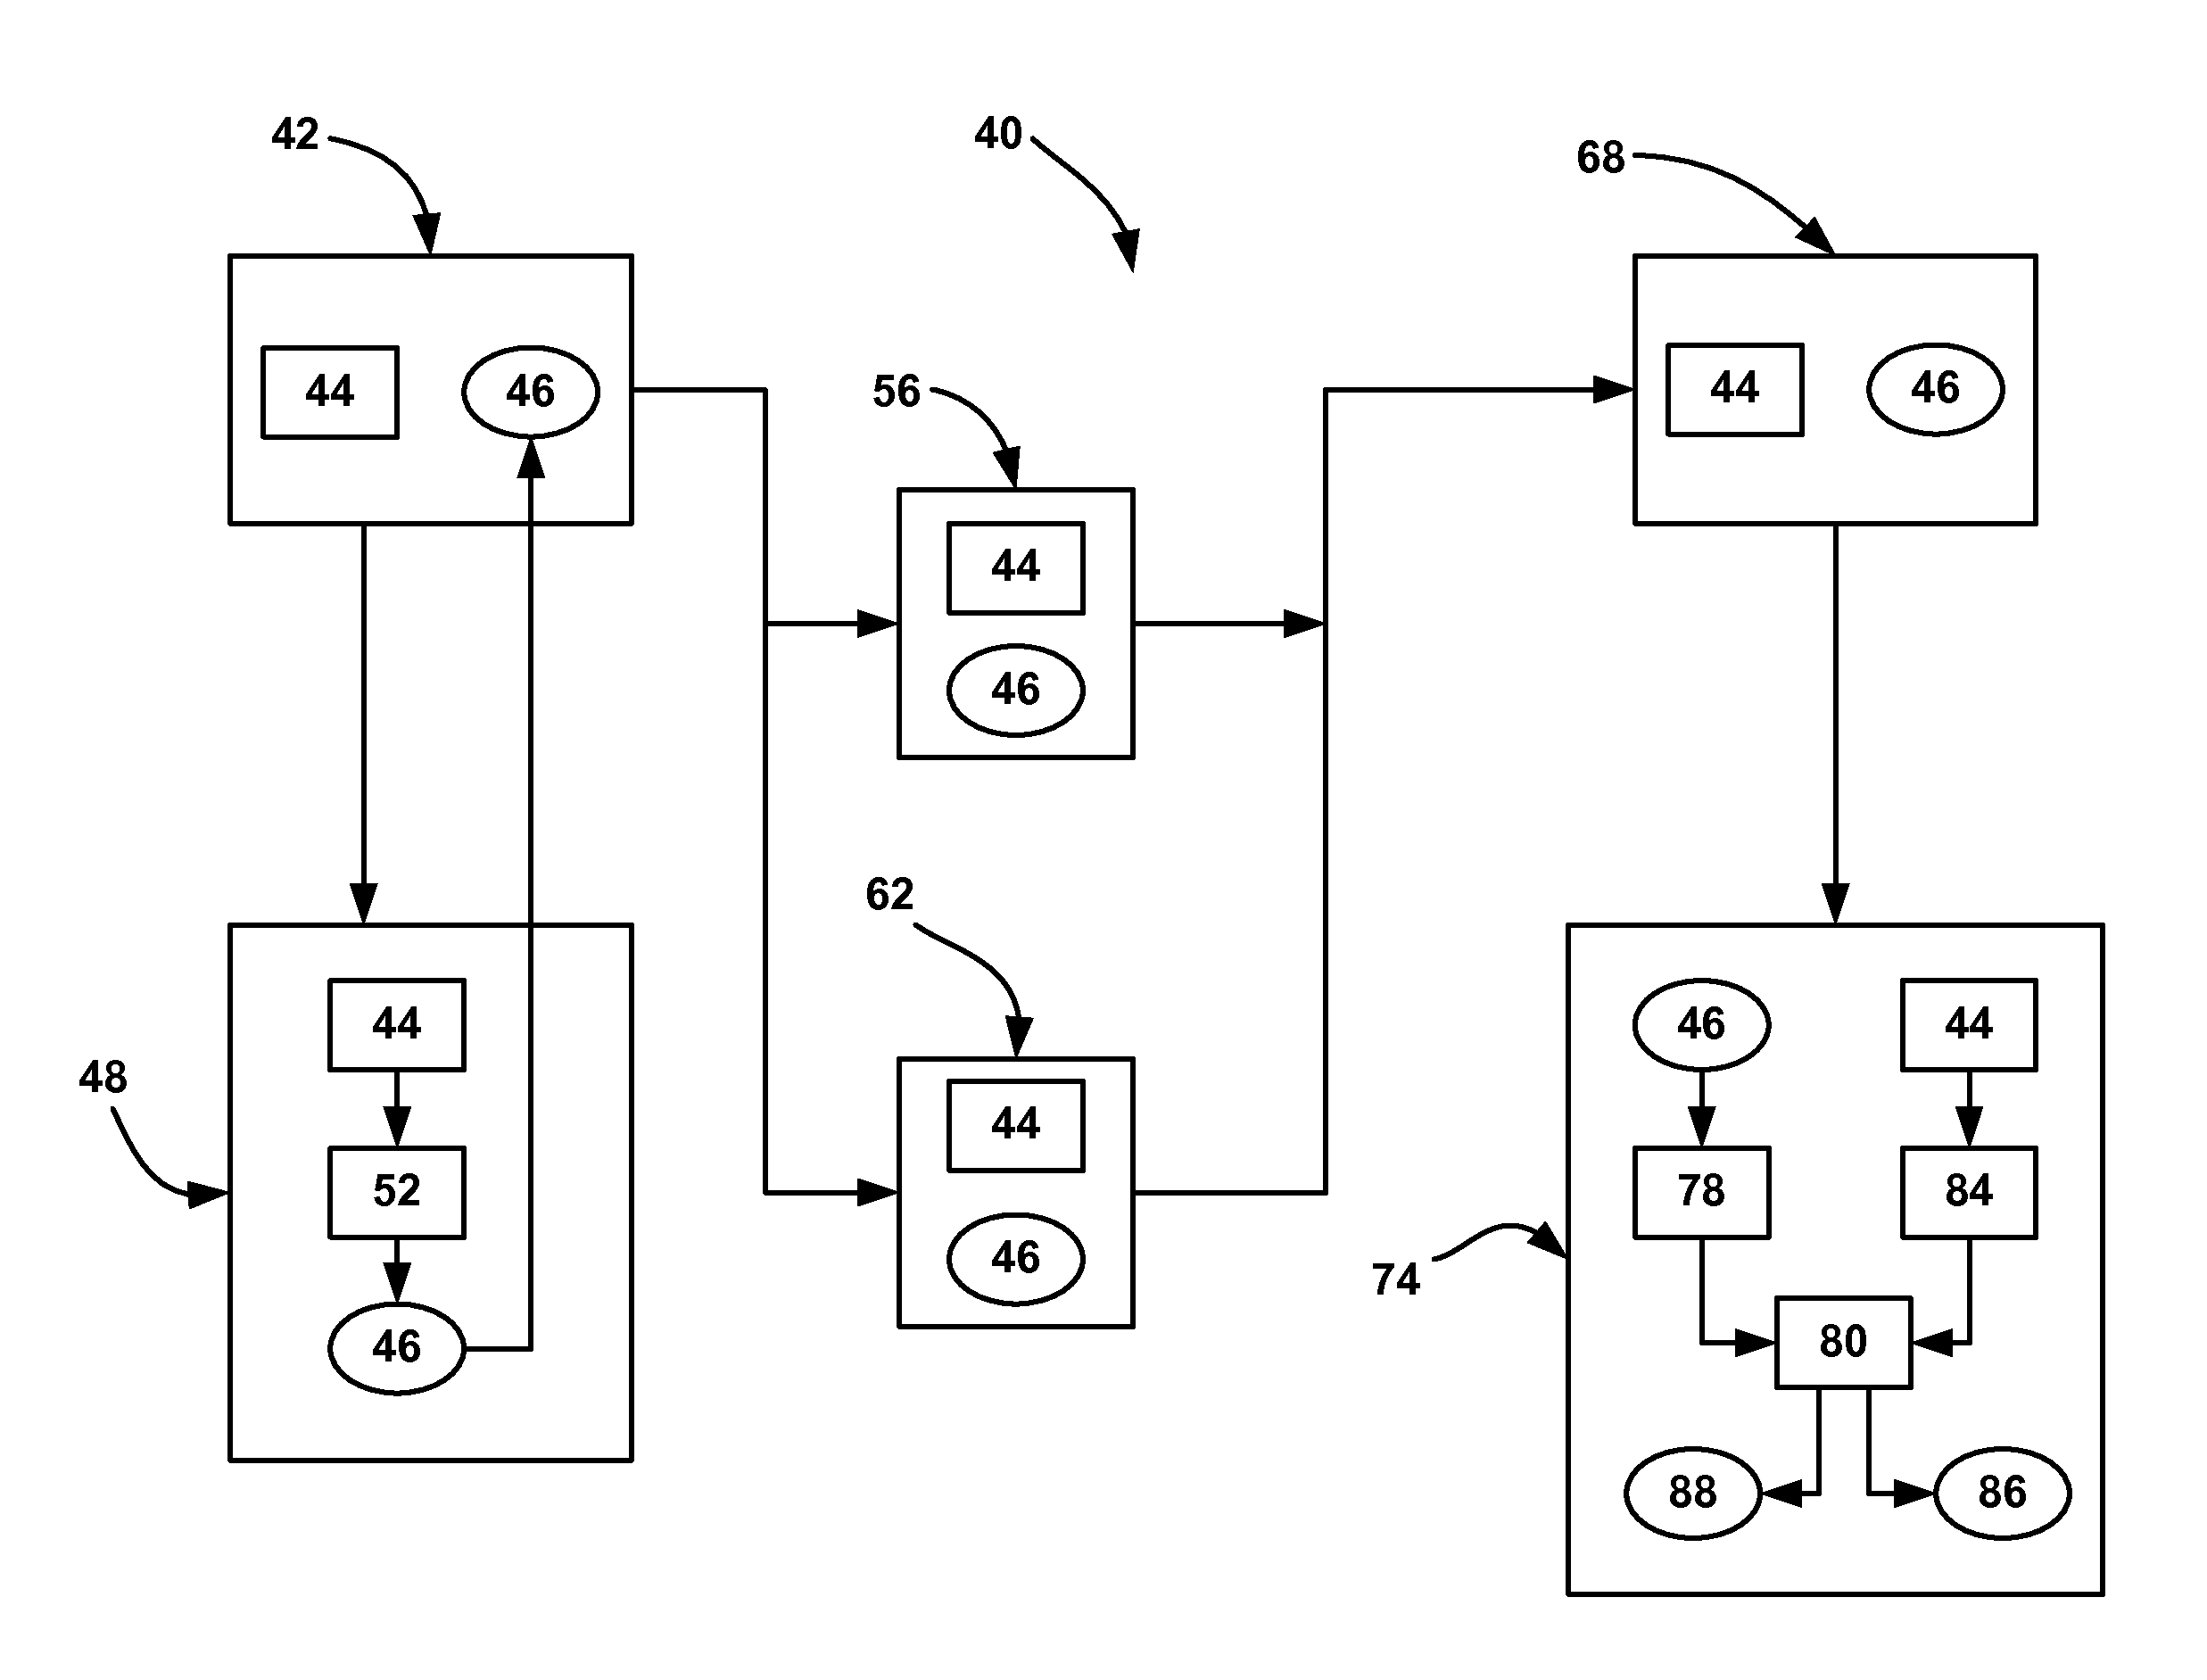 Method for selective software rollback